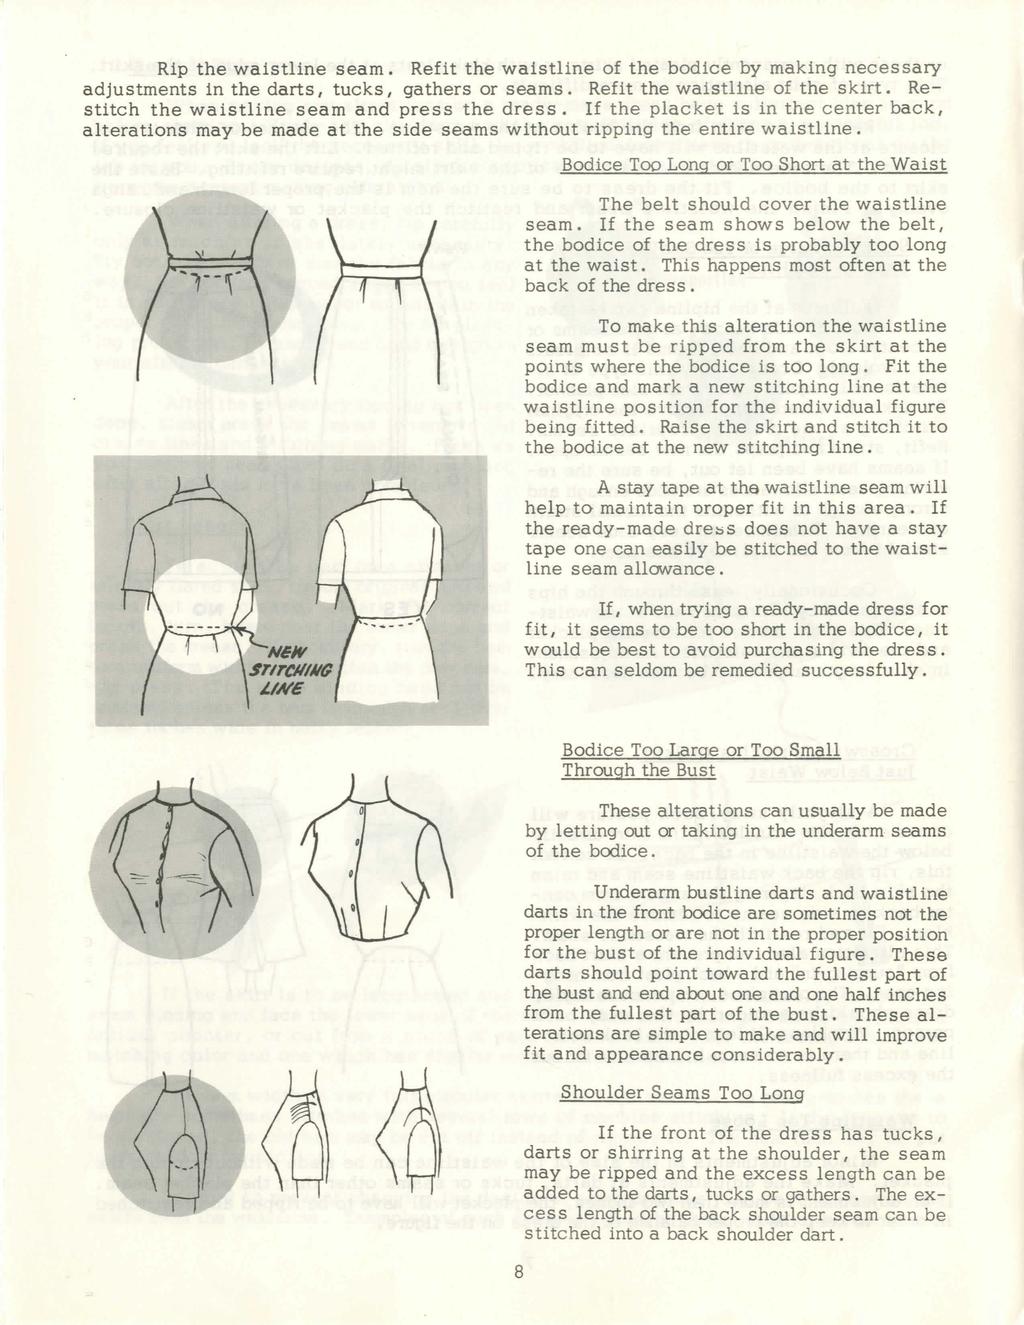 Rip the waistline seam. Refit the waistline of the bodice by making necessary adjustments in the darts, tucks, gathers or seams. Refit the waistline of the skirt.